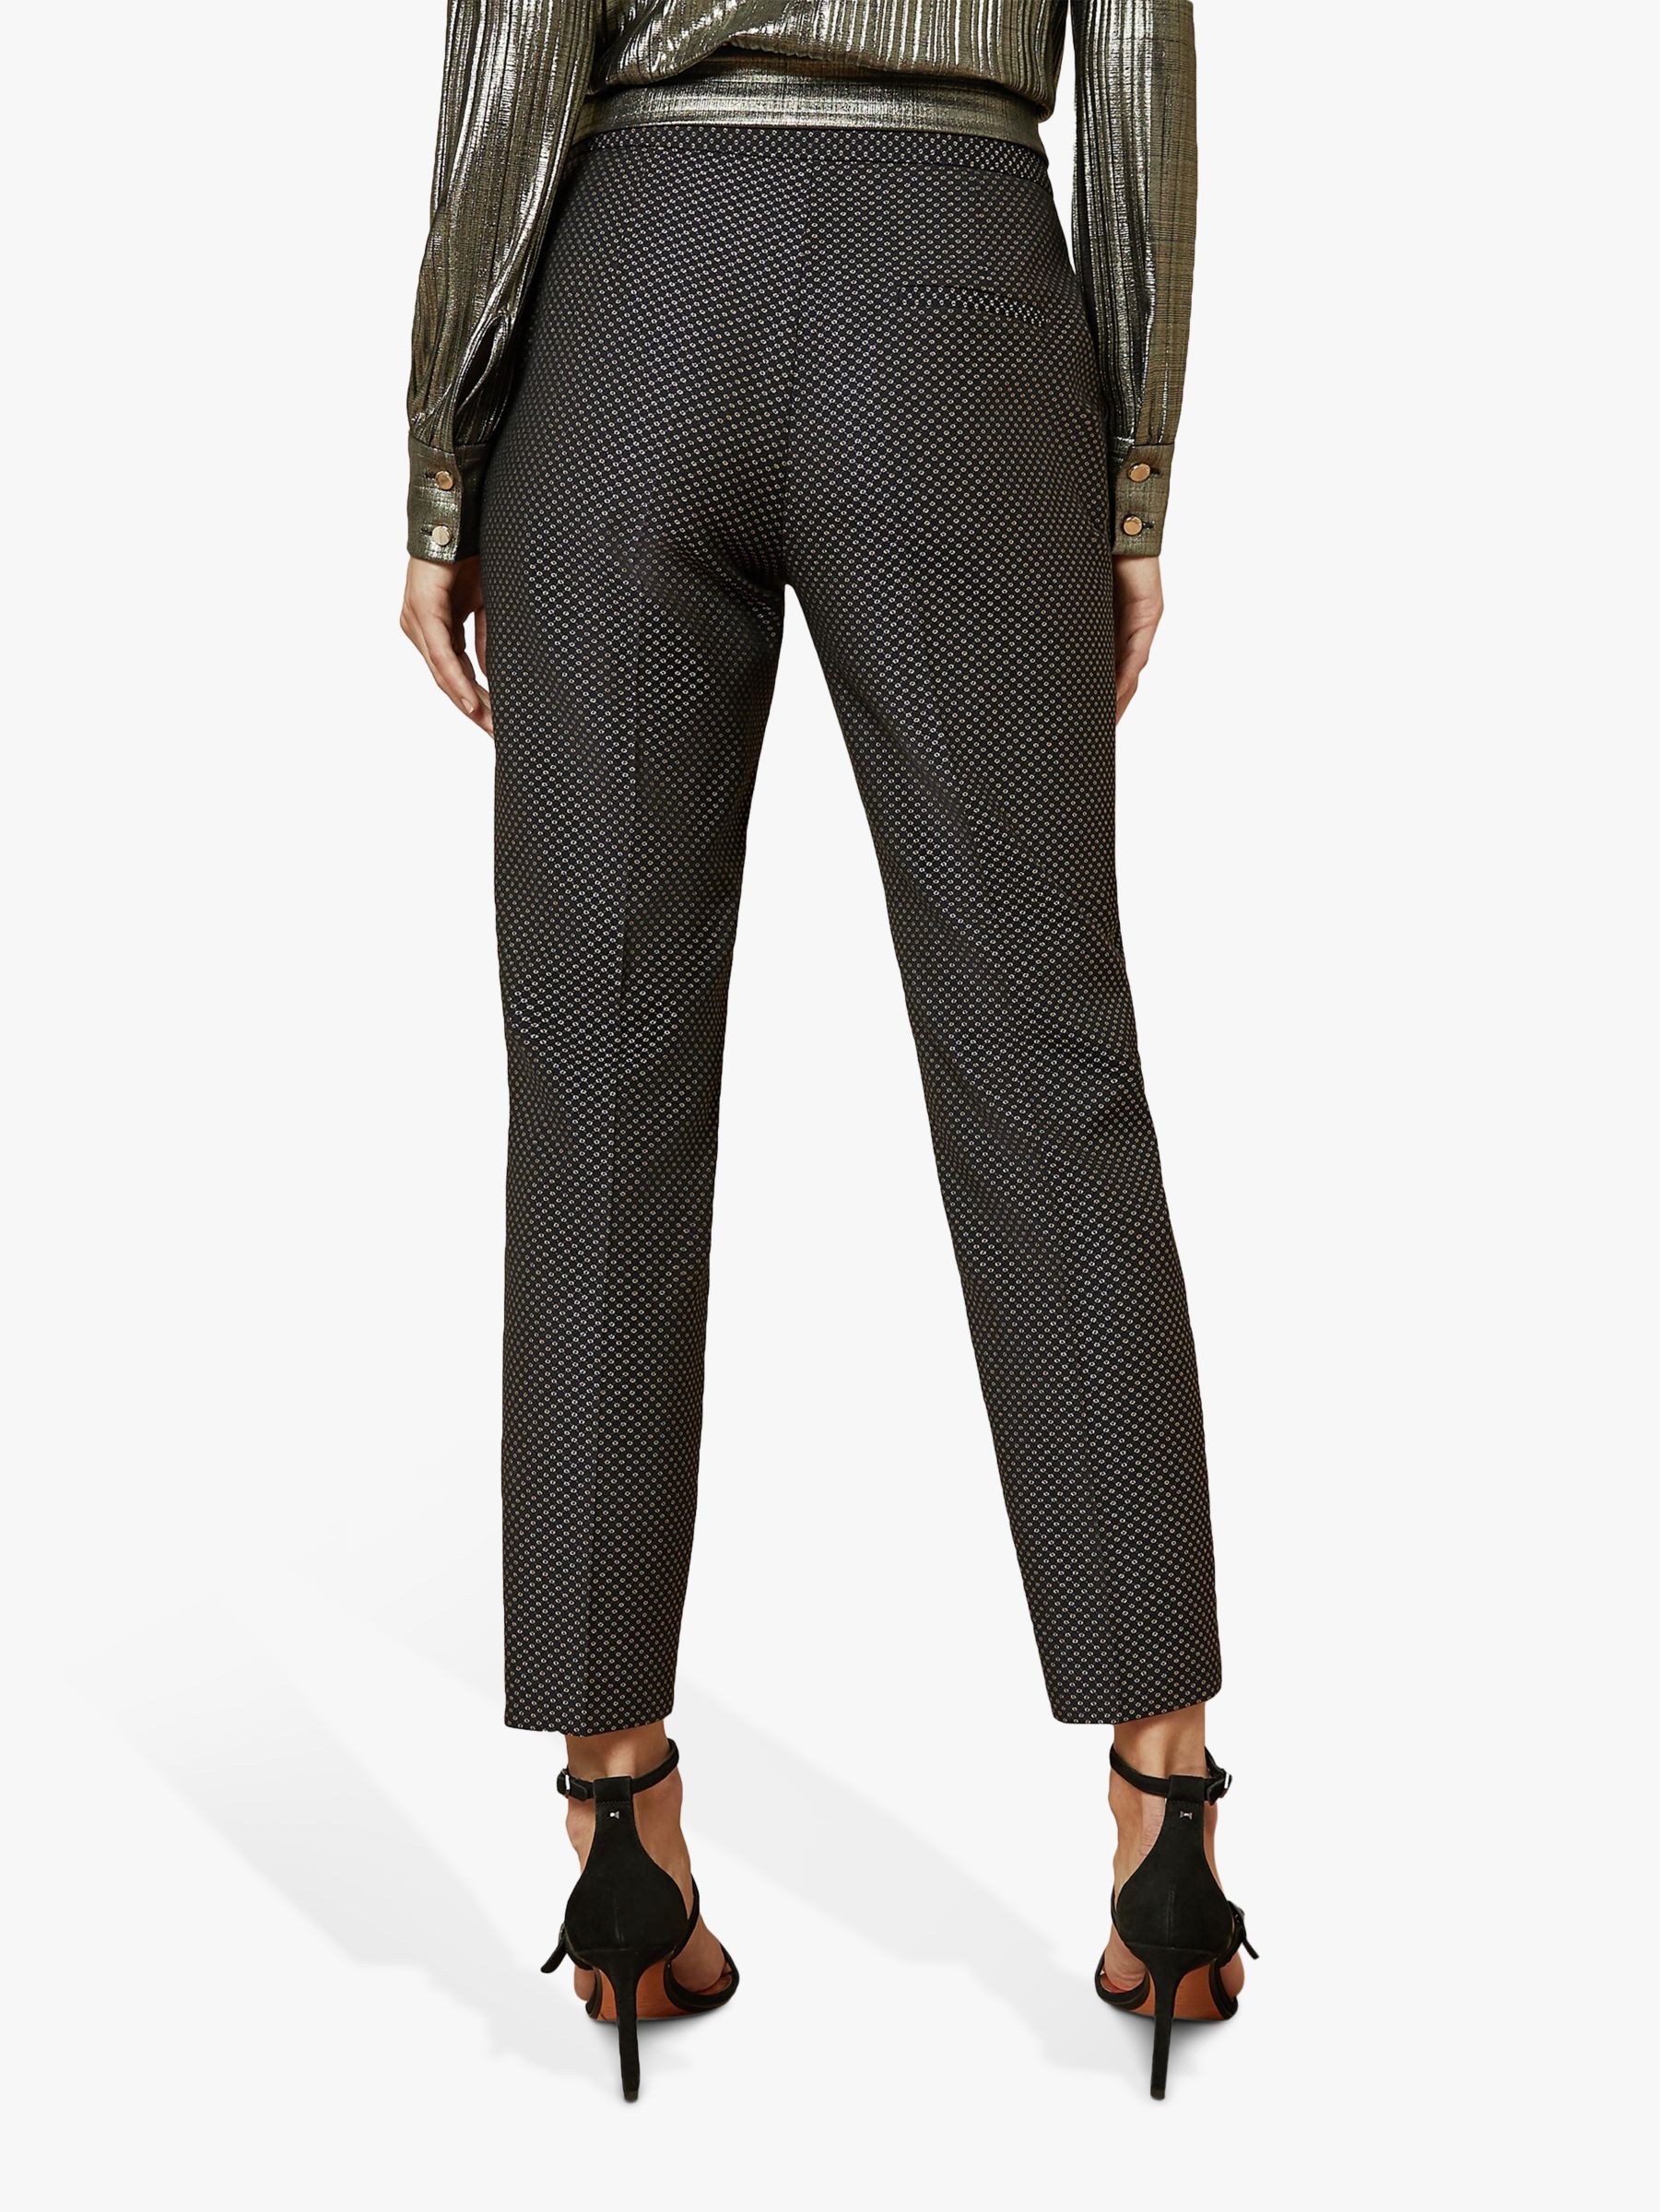 Ted Baker Neolaat Jacquard Suit Trousers, Black at John Lewis & Partners